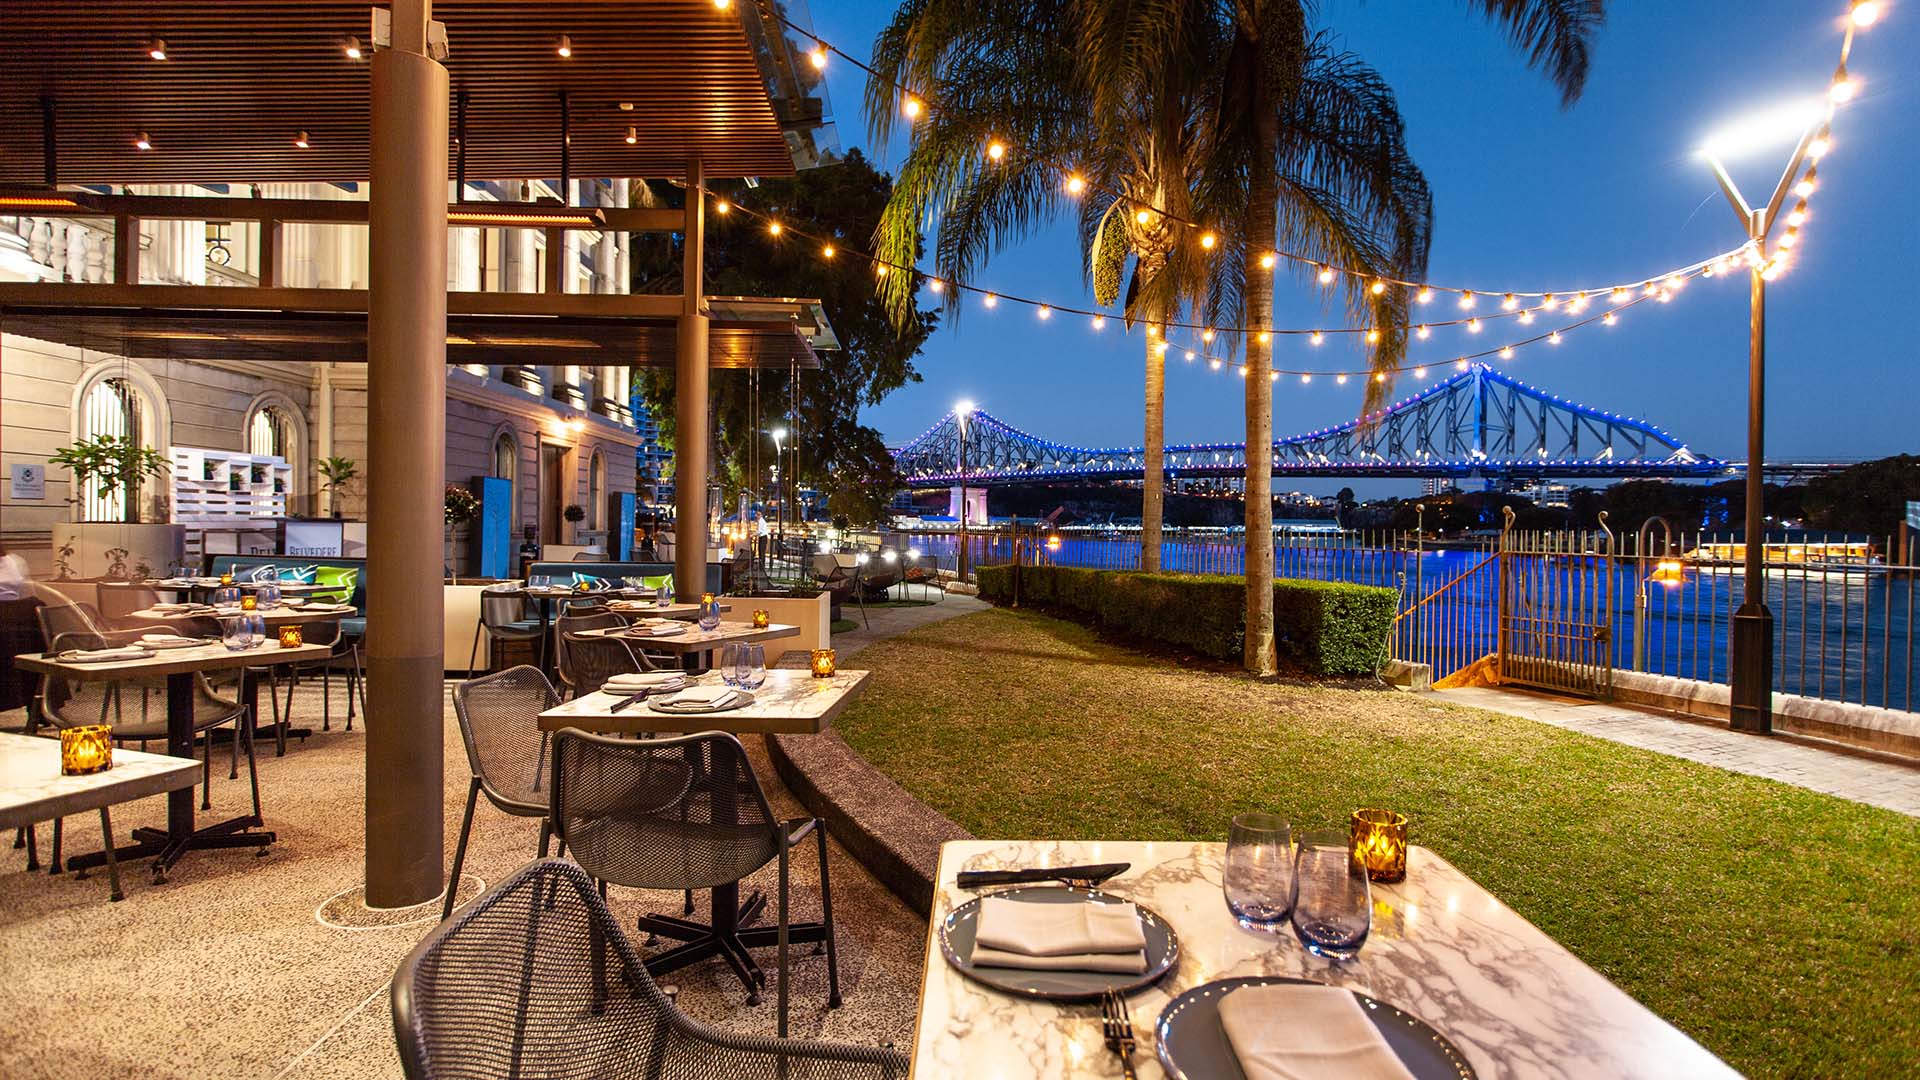 Patina Is the Brisbane CBD's New Waterfront Dining Spot with a Killer View